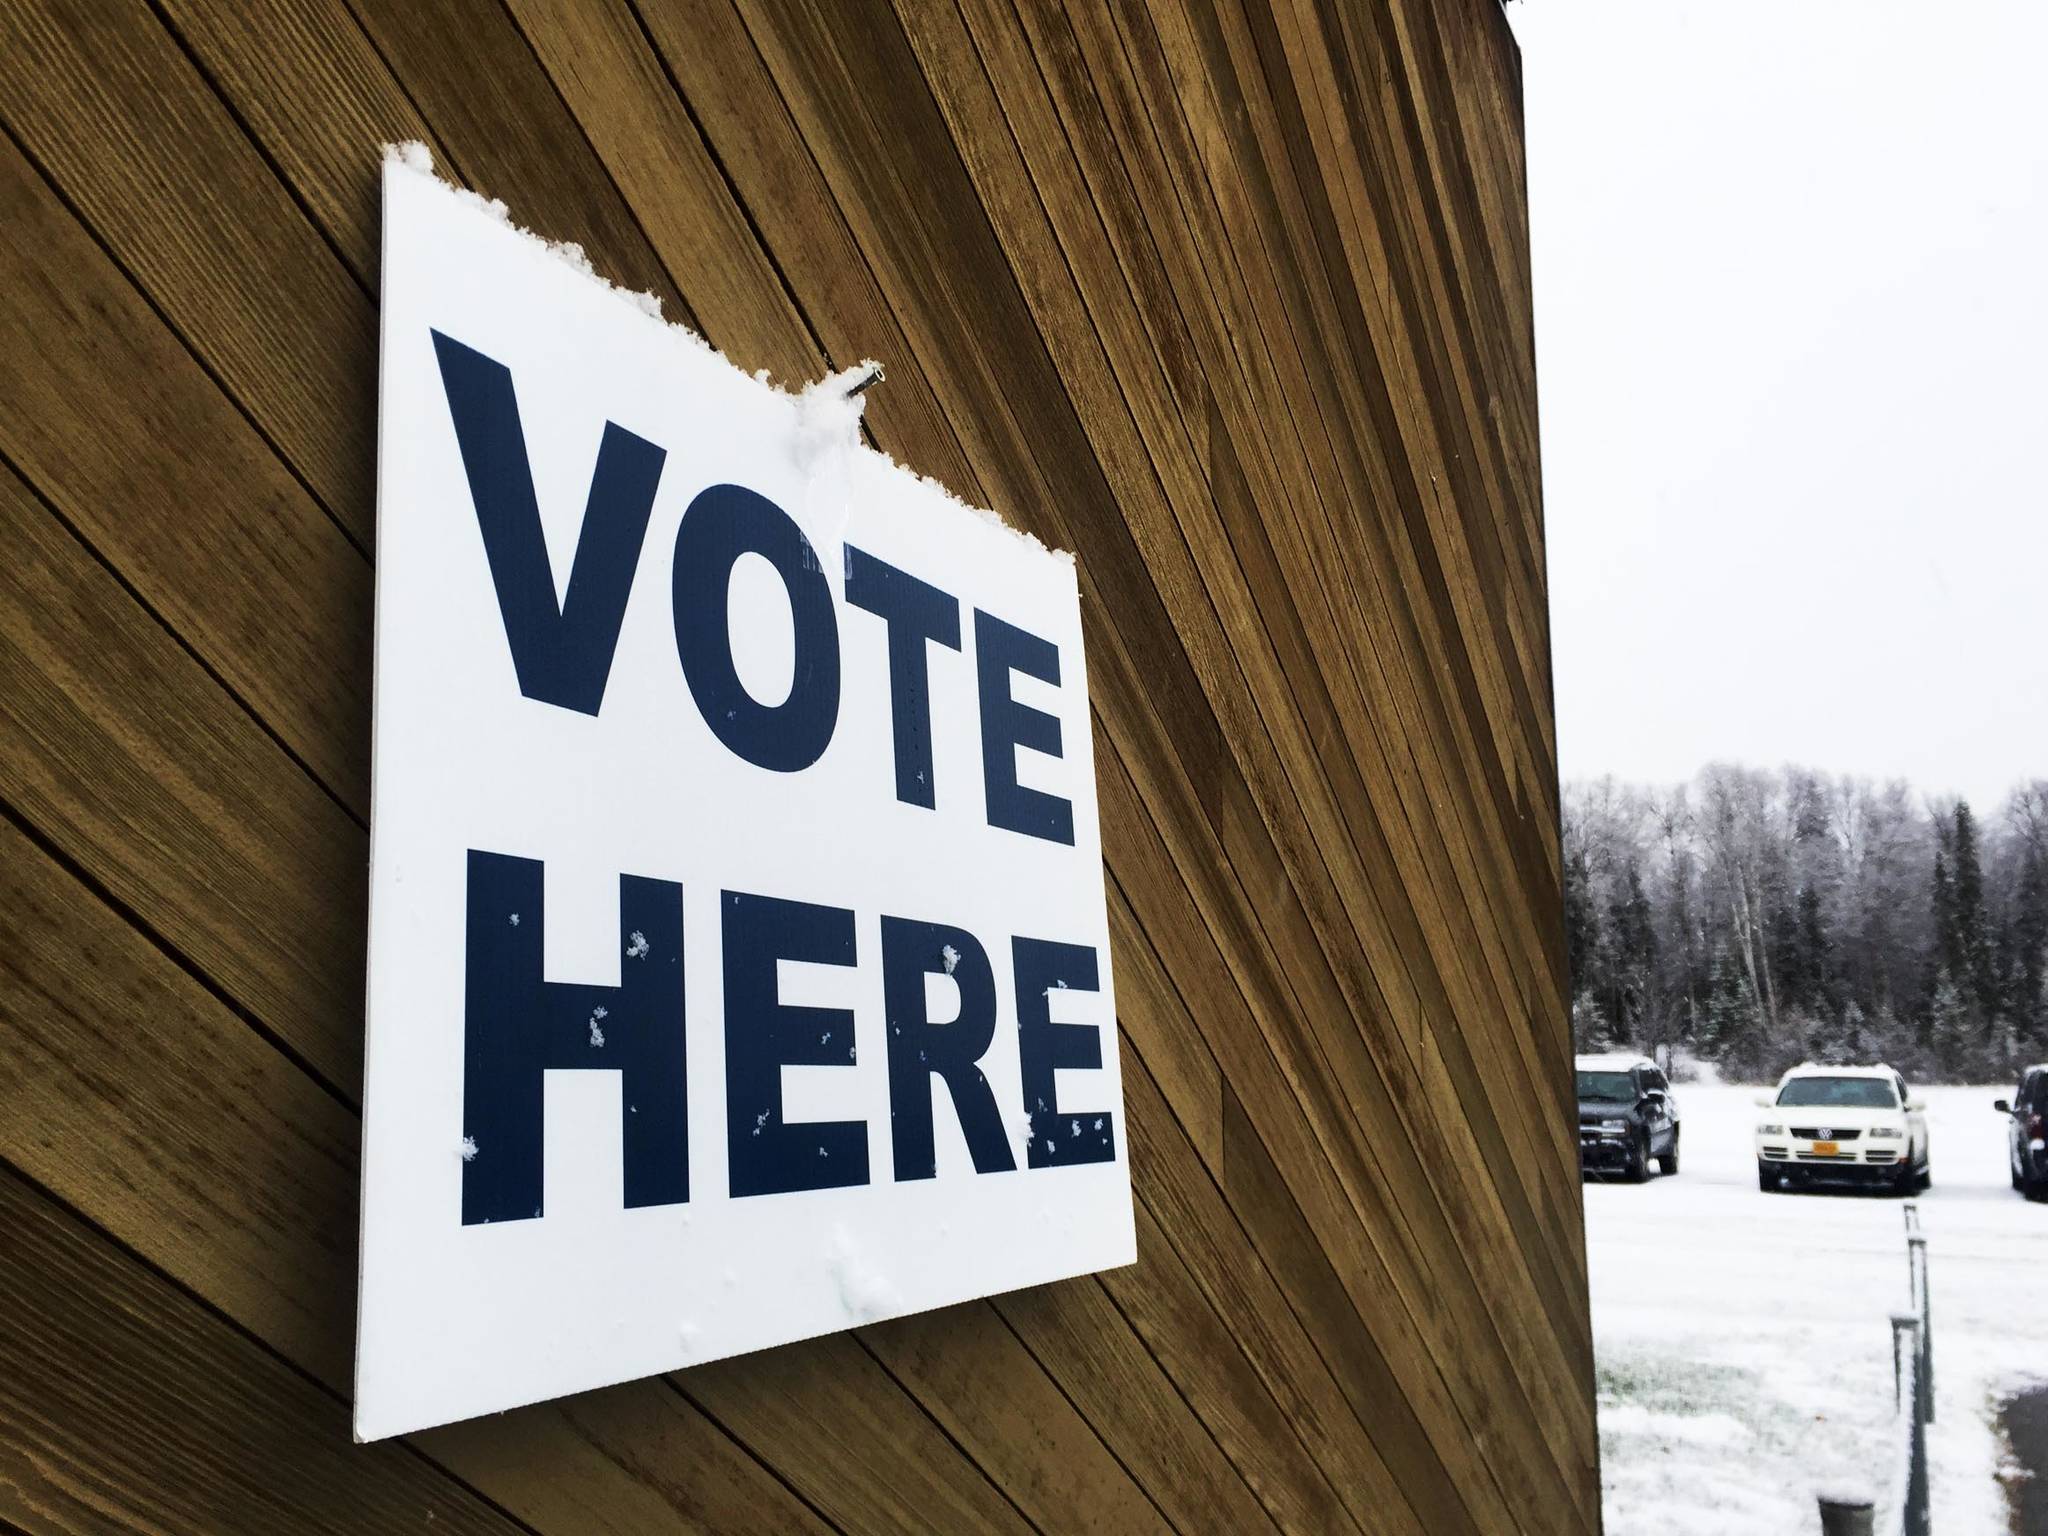 Snow clings to a sign marking a polling place at the Soldotna Regional Sports Complex on Tuesday, Oct. 24, 2017 in Soldotna, Alaska. (Photo by Elizabeth Earl/Peninsula Clarion, file)